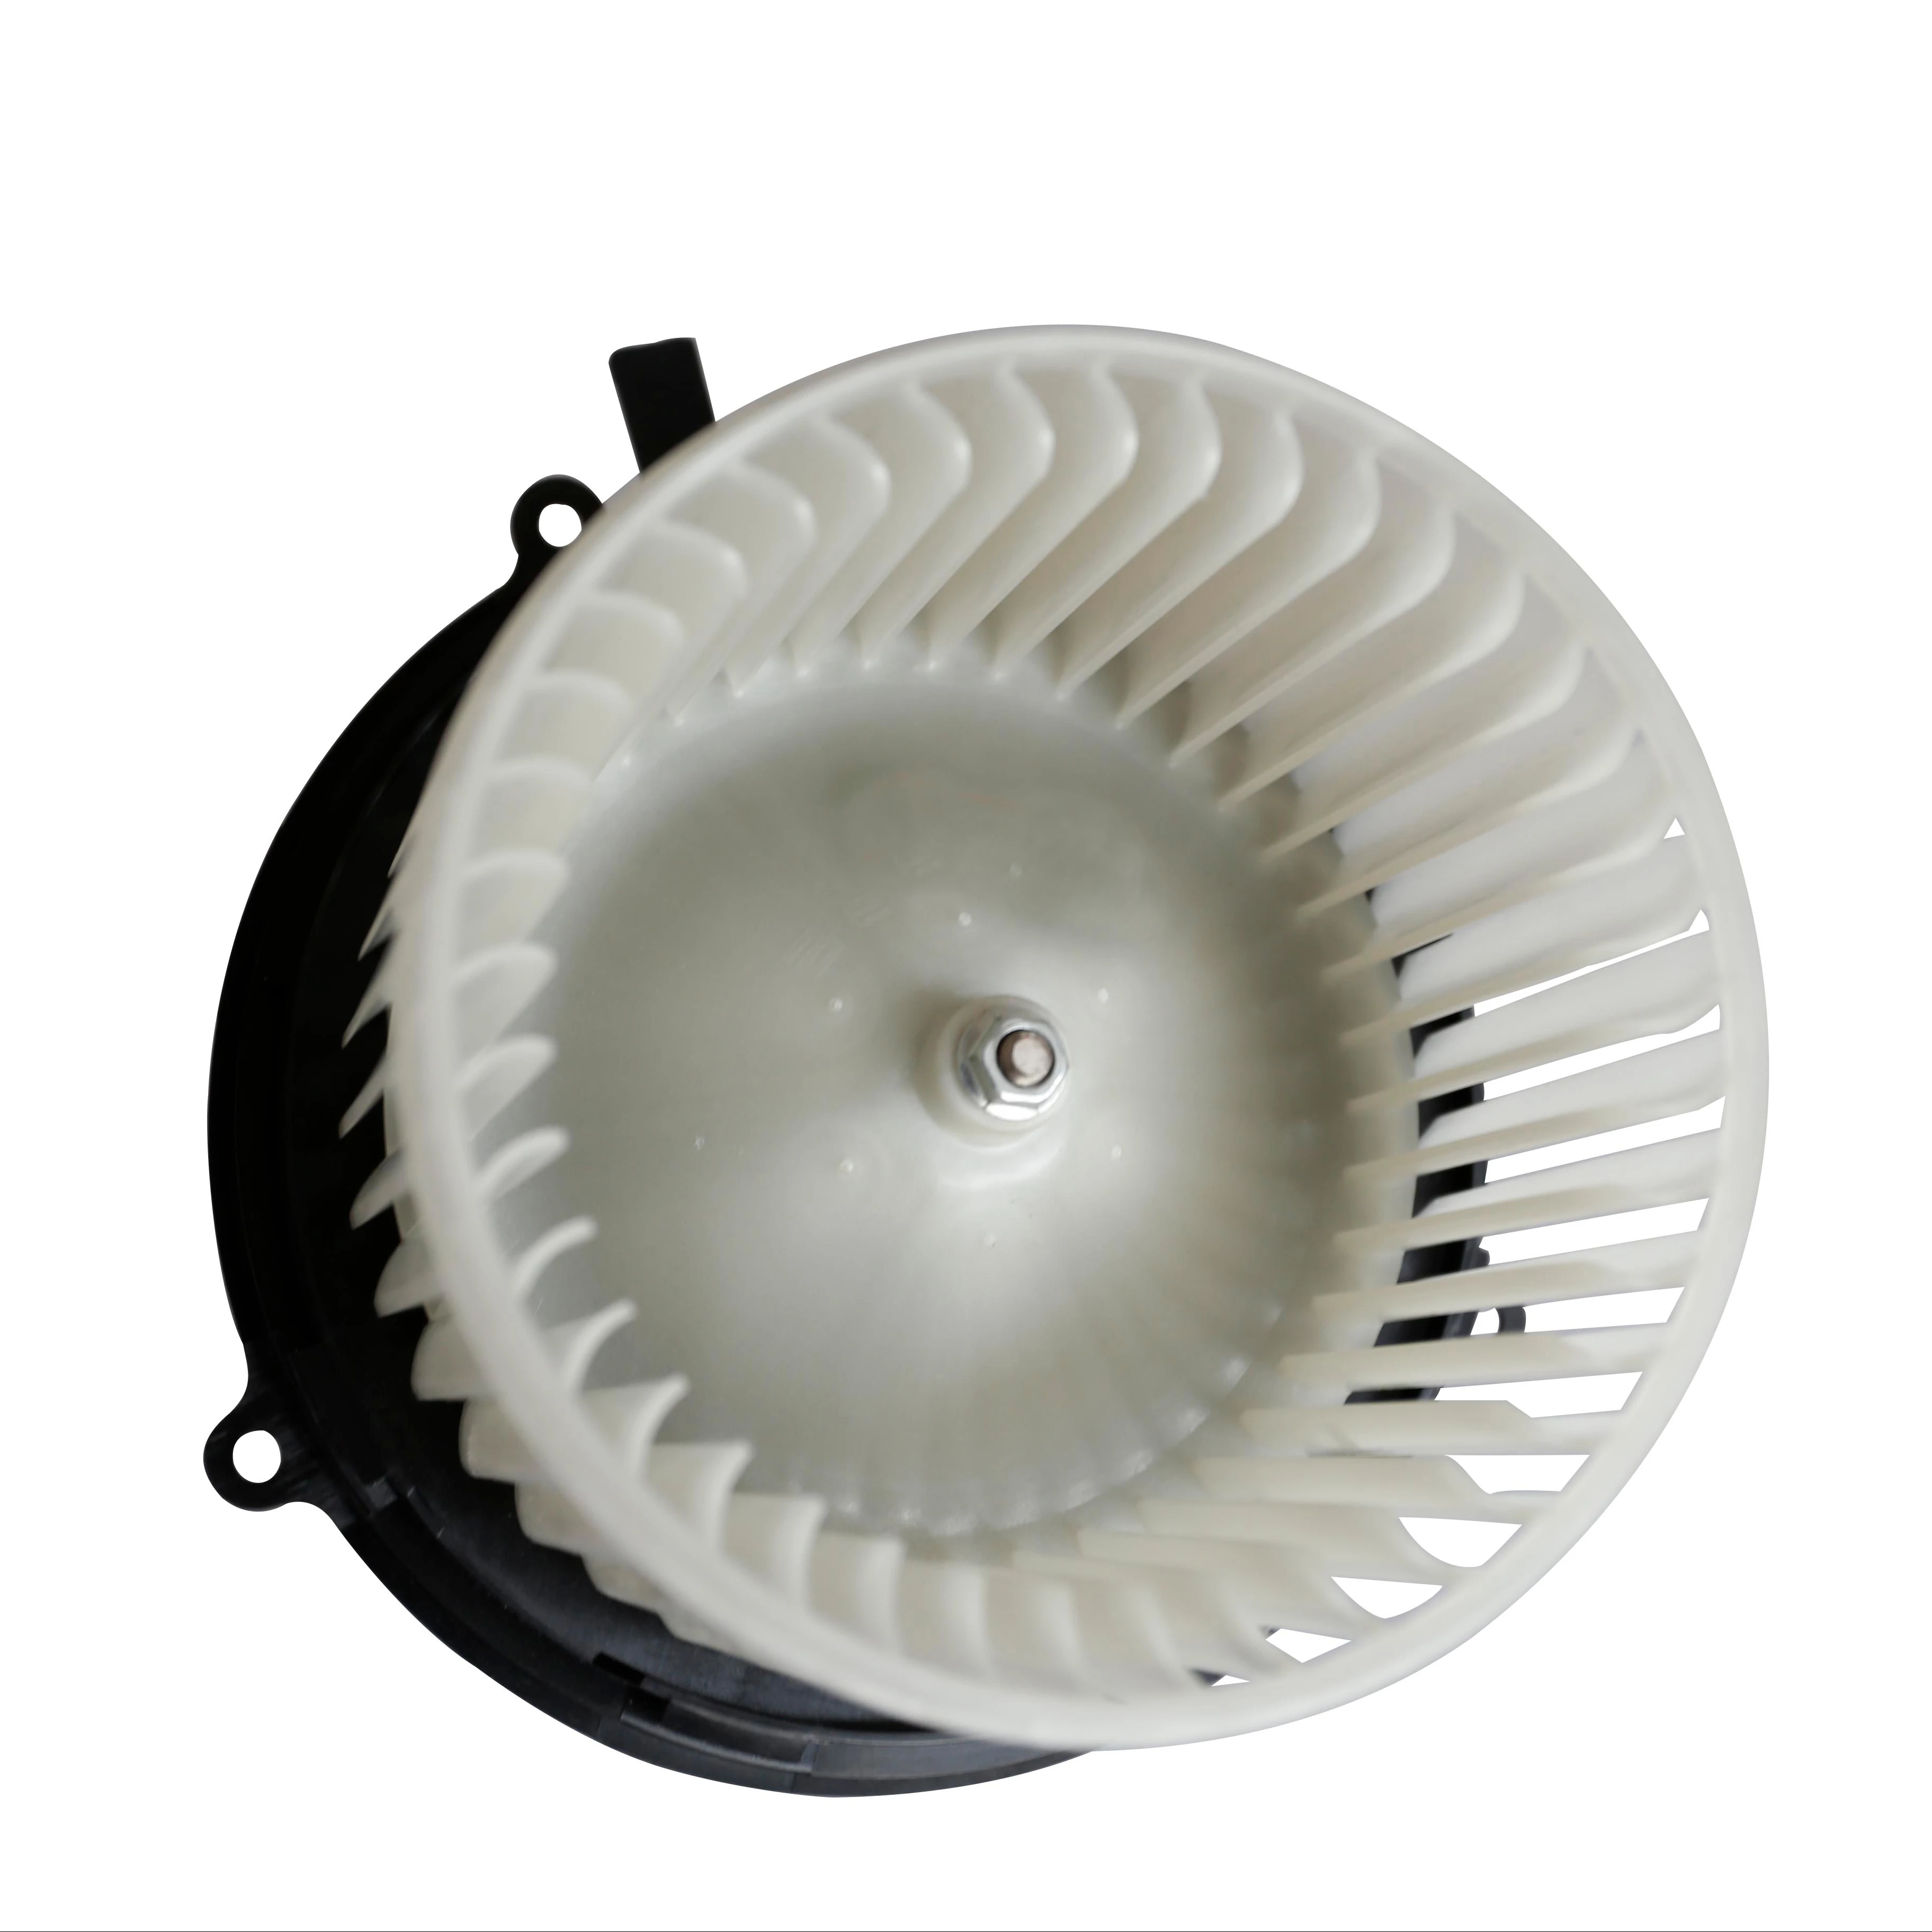 
Aftermarket Fan Blower Motor For Car Air Conditioning OE 74150-76G00 